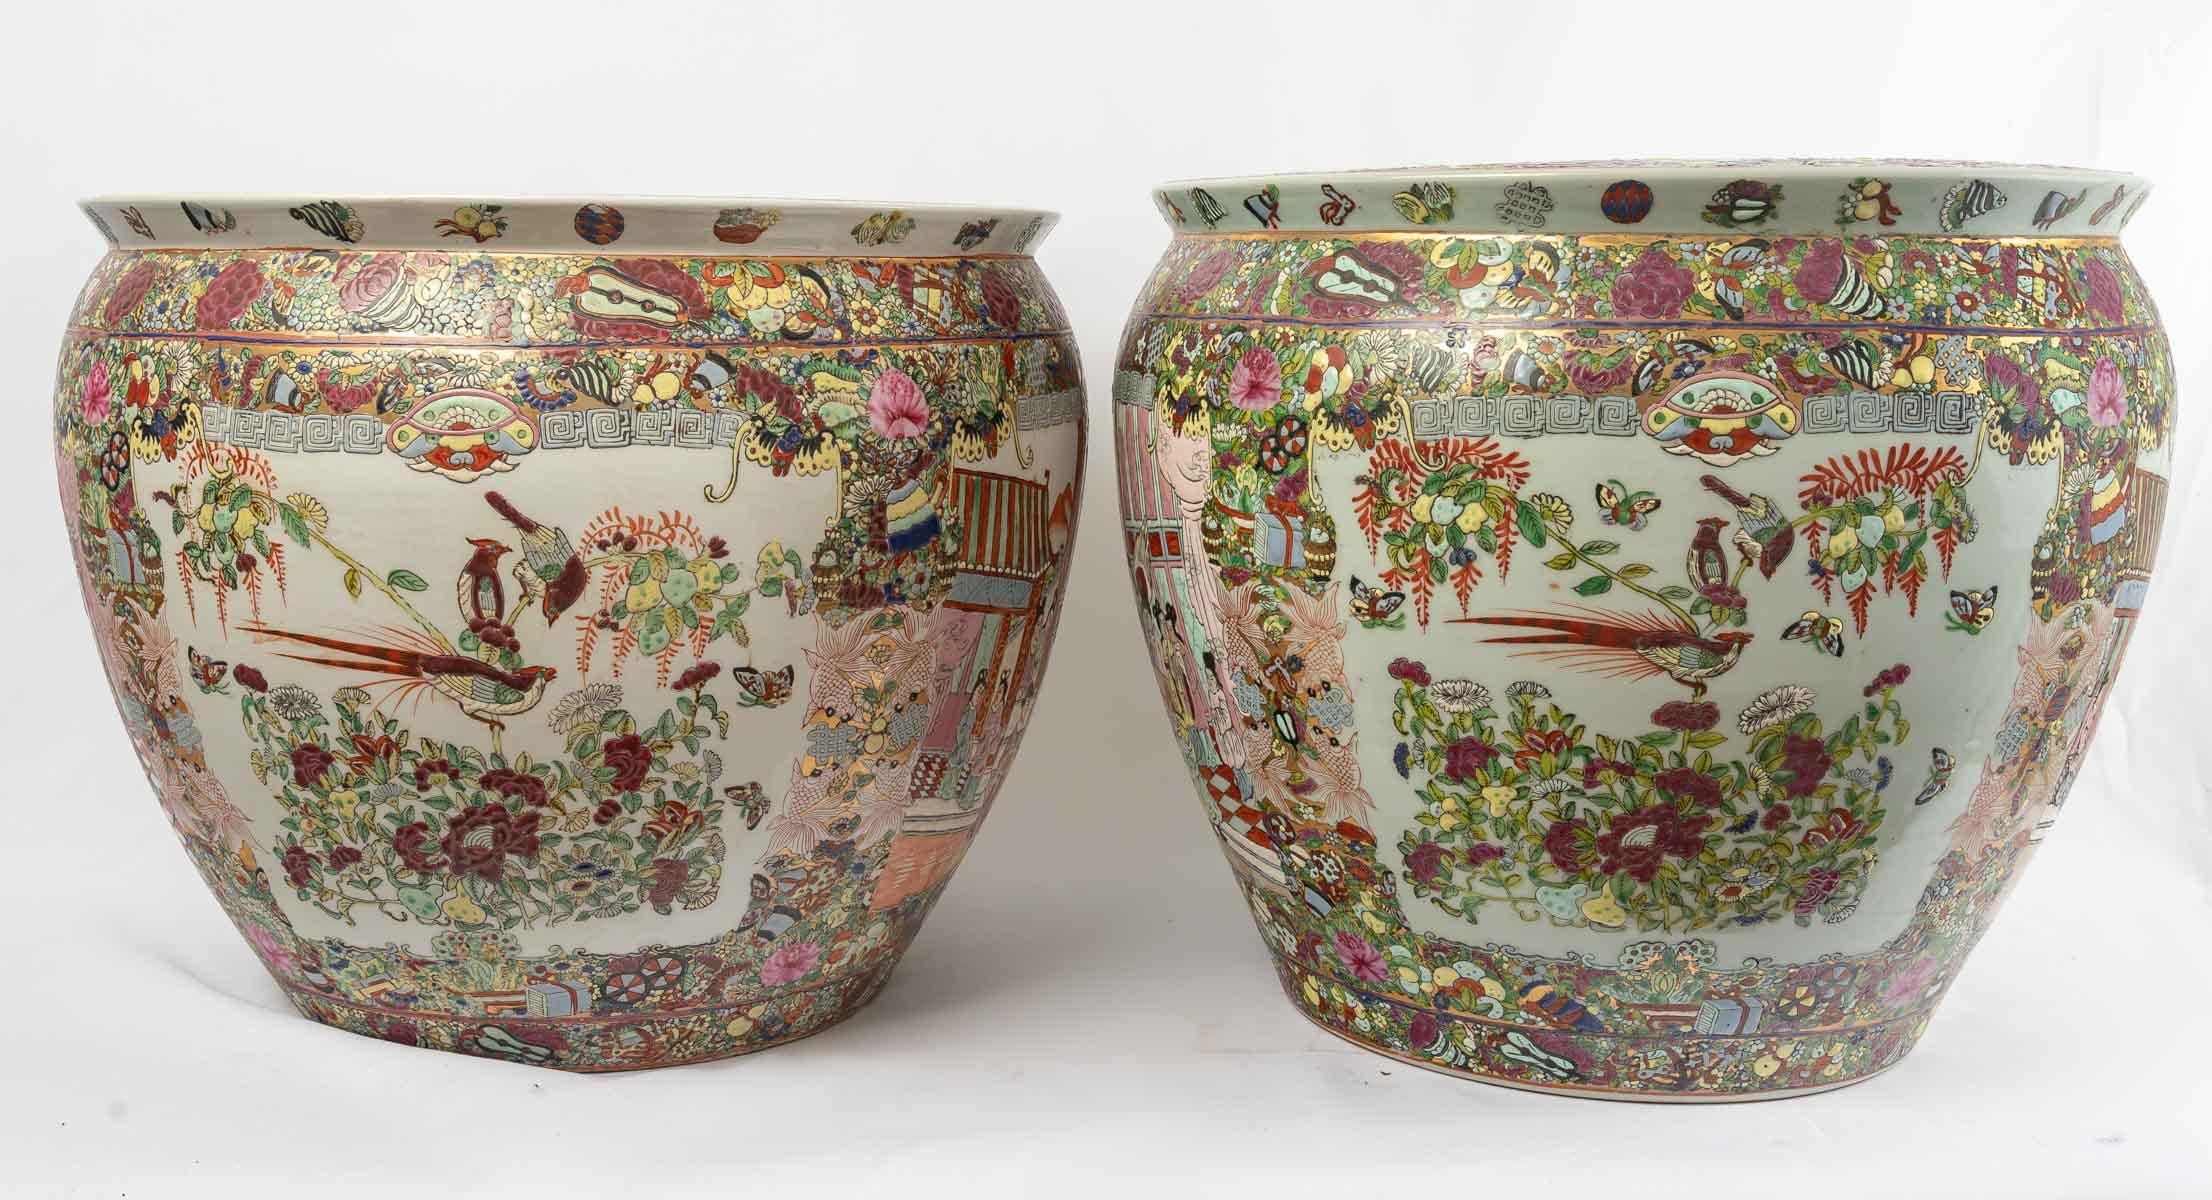 Magnificent pair of Chinese porcelain fish tanks, with fine cloisonné enamel decorations of animated scenes of characters, flowers, birds, butterflies on a white background on the outside and decorated with five fish among aquatic plants on the